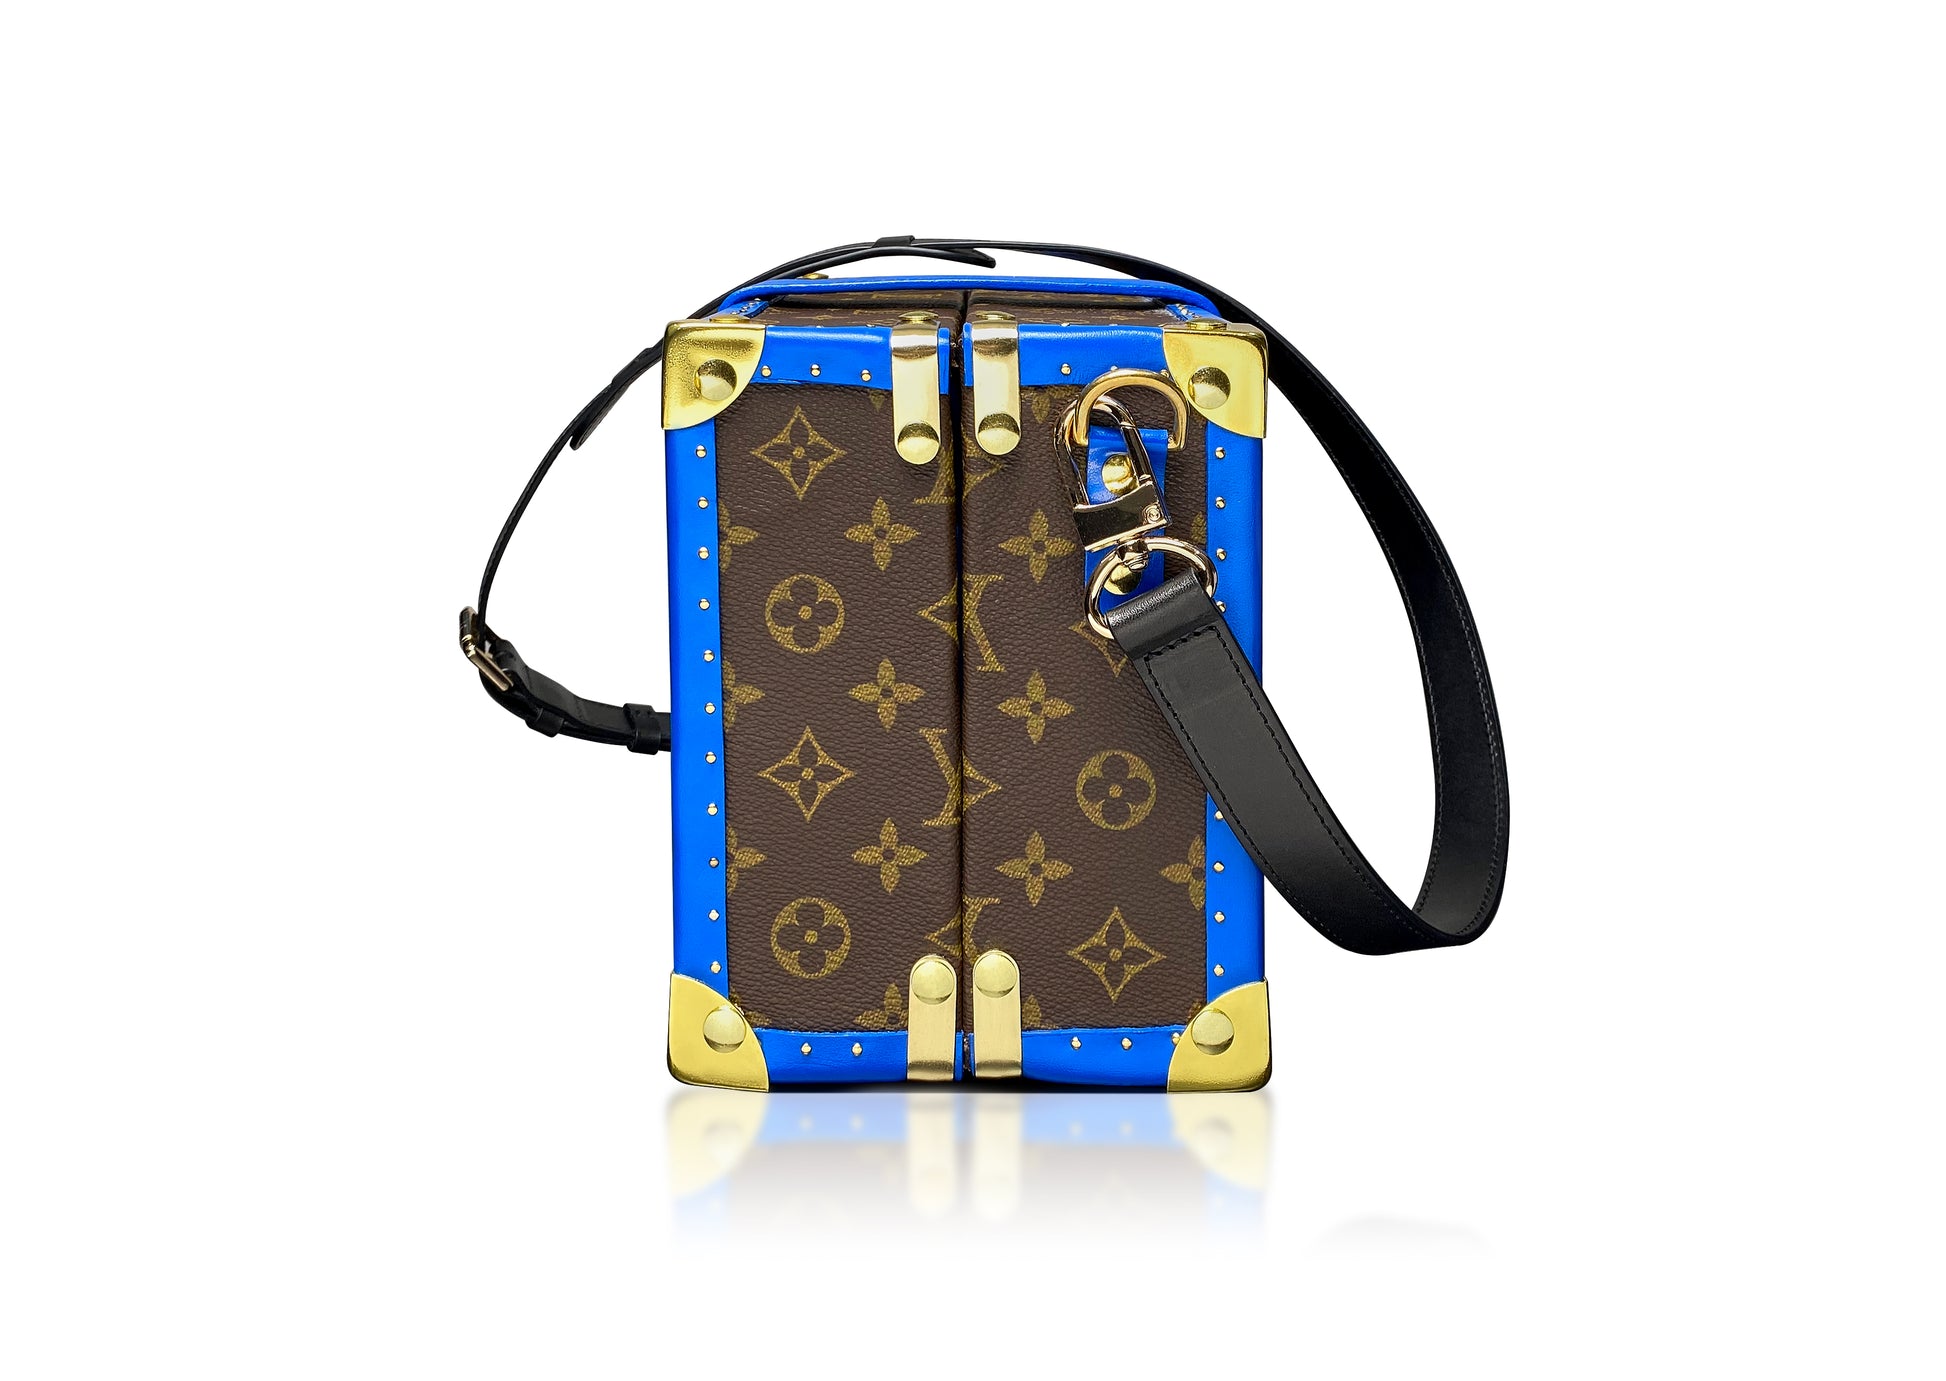 BAG NEW ARRIVAL - LOUIS VUITTON SOFT TRUNK BACKPACK BAG CHARM AND